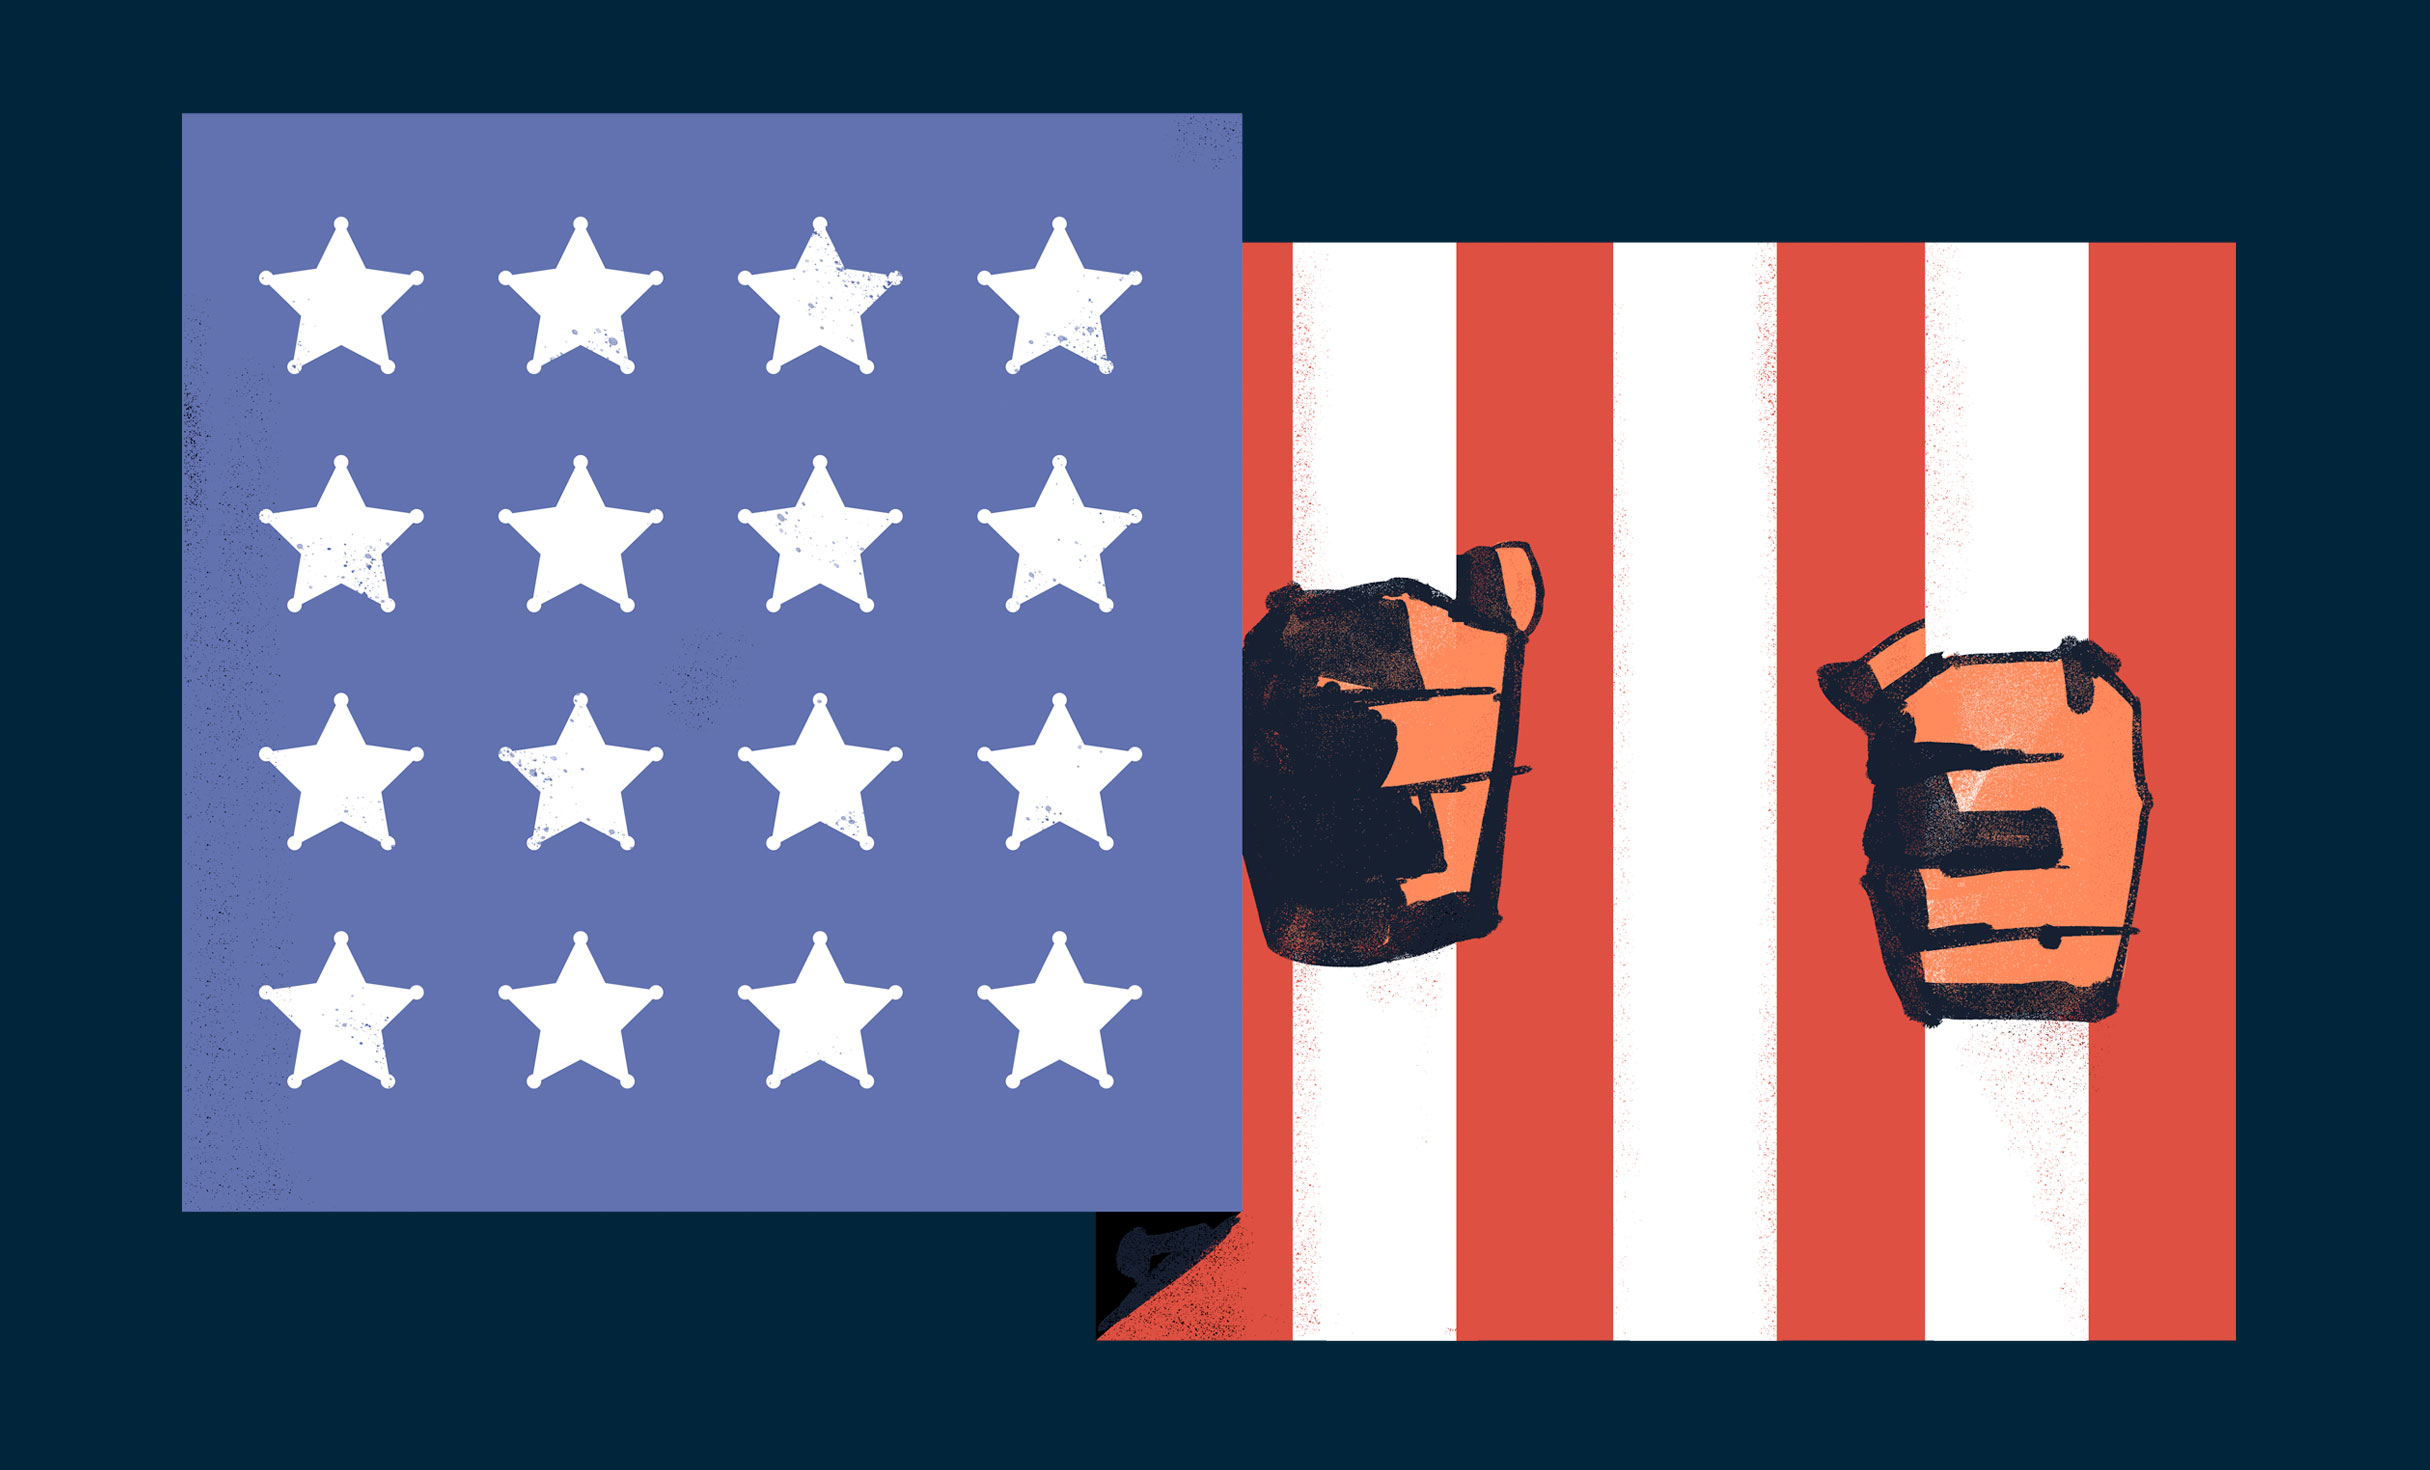 An illustration of the american flag with the stars replaced with sheriff stars and the stripes rotating to look like bars. Two hands are gripping the bars.